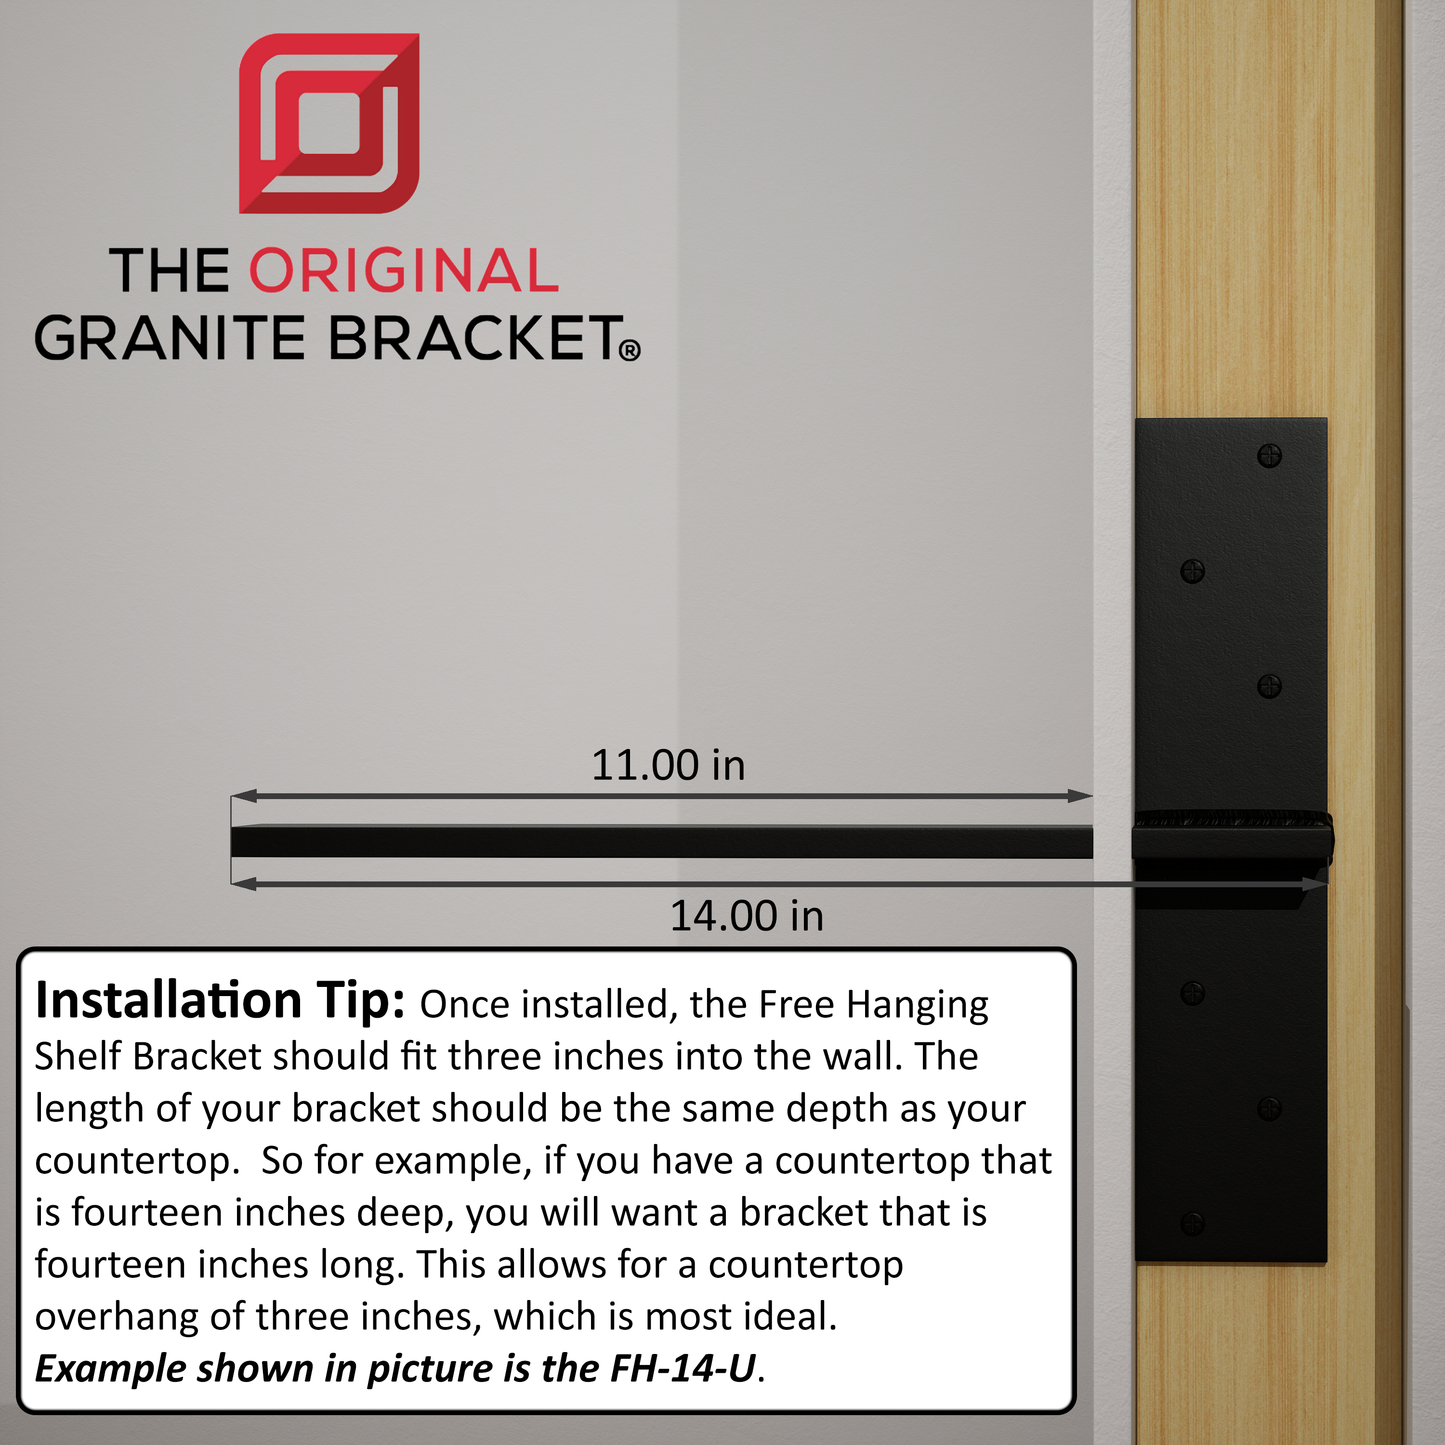 
                  
                    Installation Tip: Once installed, the Free Hanging Shelf Bracket should fit three inches into the wall. The length of your bracket should be the same depth as your countertop. So for example, if you have a countertop that is fourteen inches deep, you will want a bracket that is fourteen inches long. This allows for a countertop overhang of three inches, which is most ideal. Example shown in picture is the FH-14-U.
                  
                